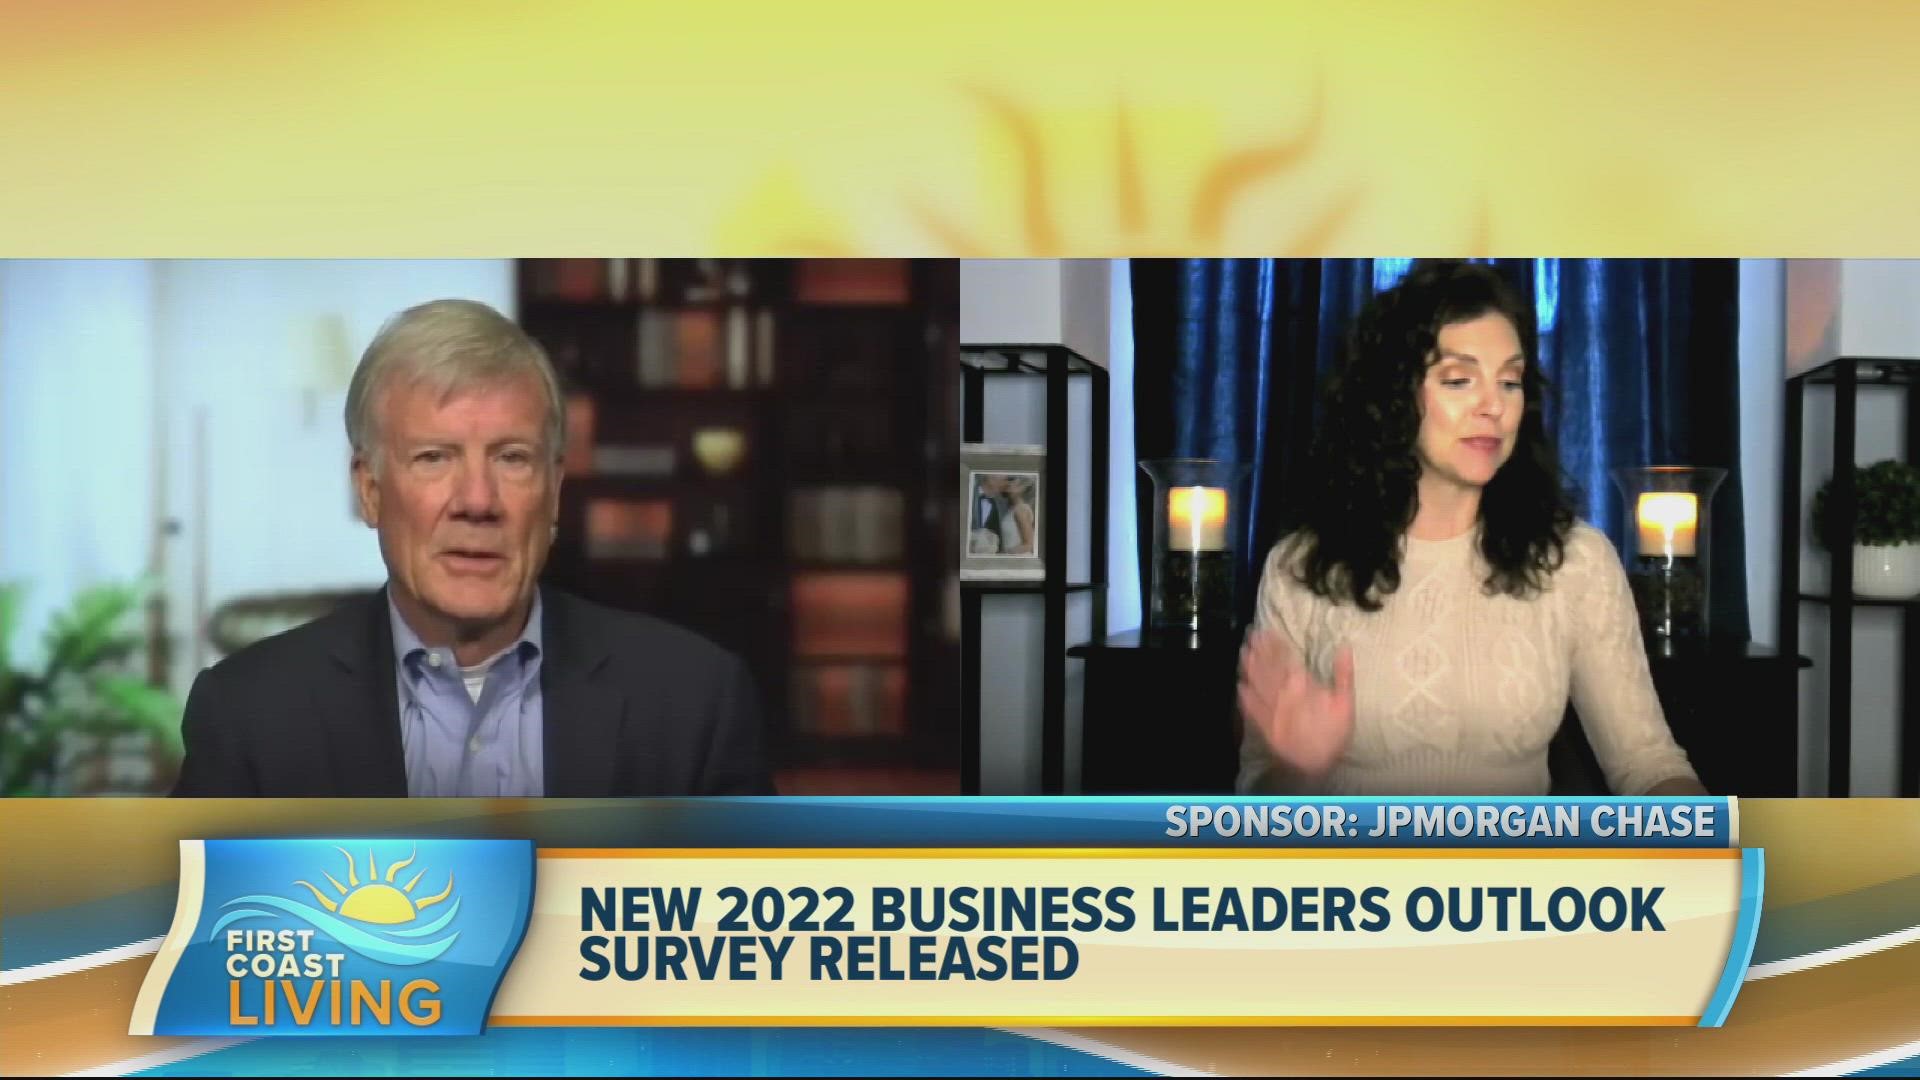 Head Economist for JPMorgan Chase Commercial Banking, Jim Glassman shares the results of the 2022 Business Leaders Outlook survey and what that means for businesses.